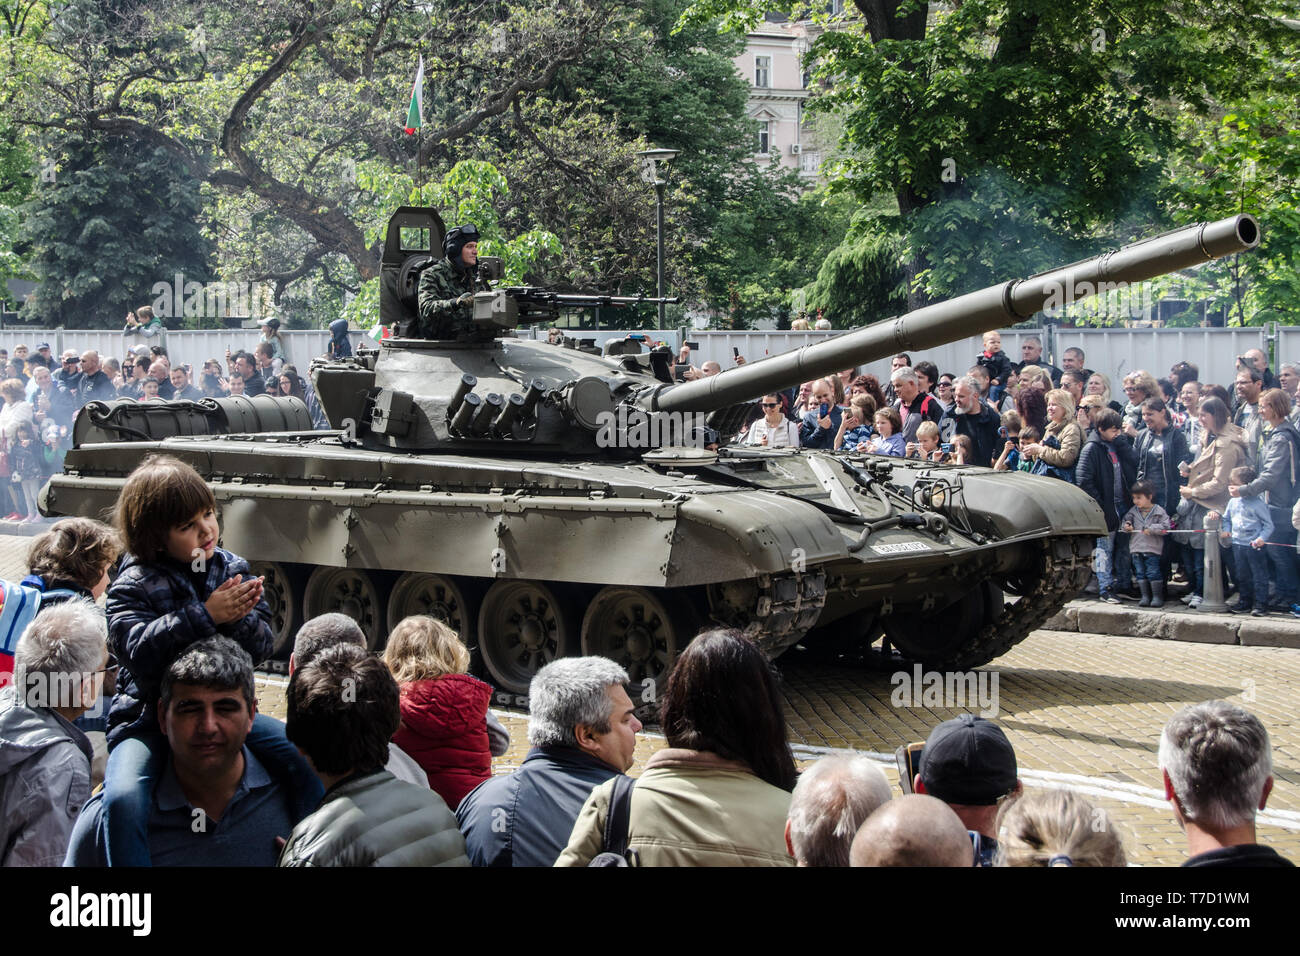 Sofia, Bulgaria – May, 06, 2019: St. George’s Day - Traditional Military parade in Sofia, Bulgaria on 6th of May – The Day of Bravery. Stock Photo